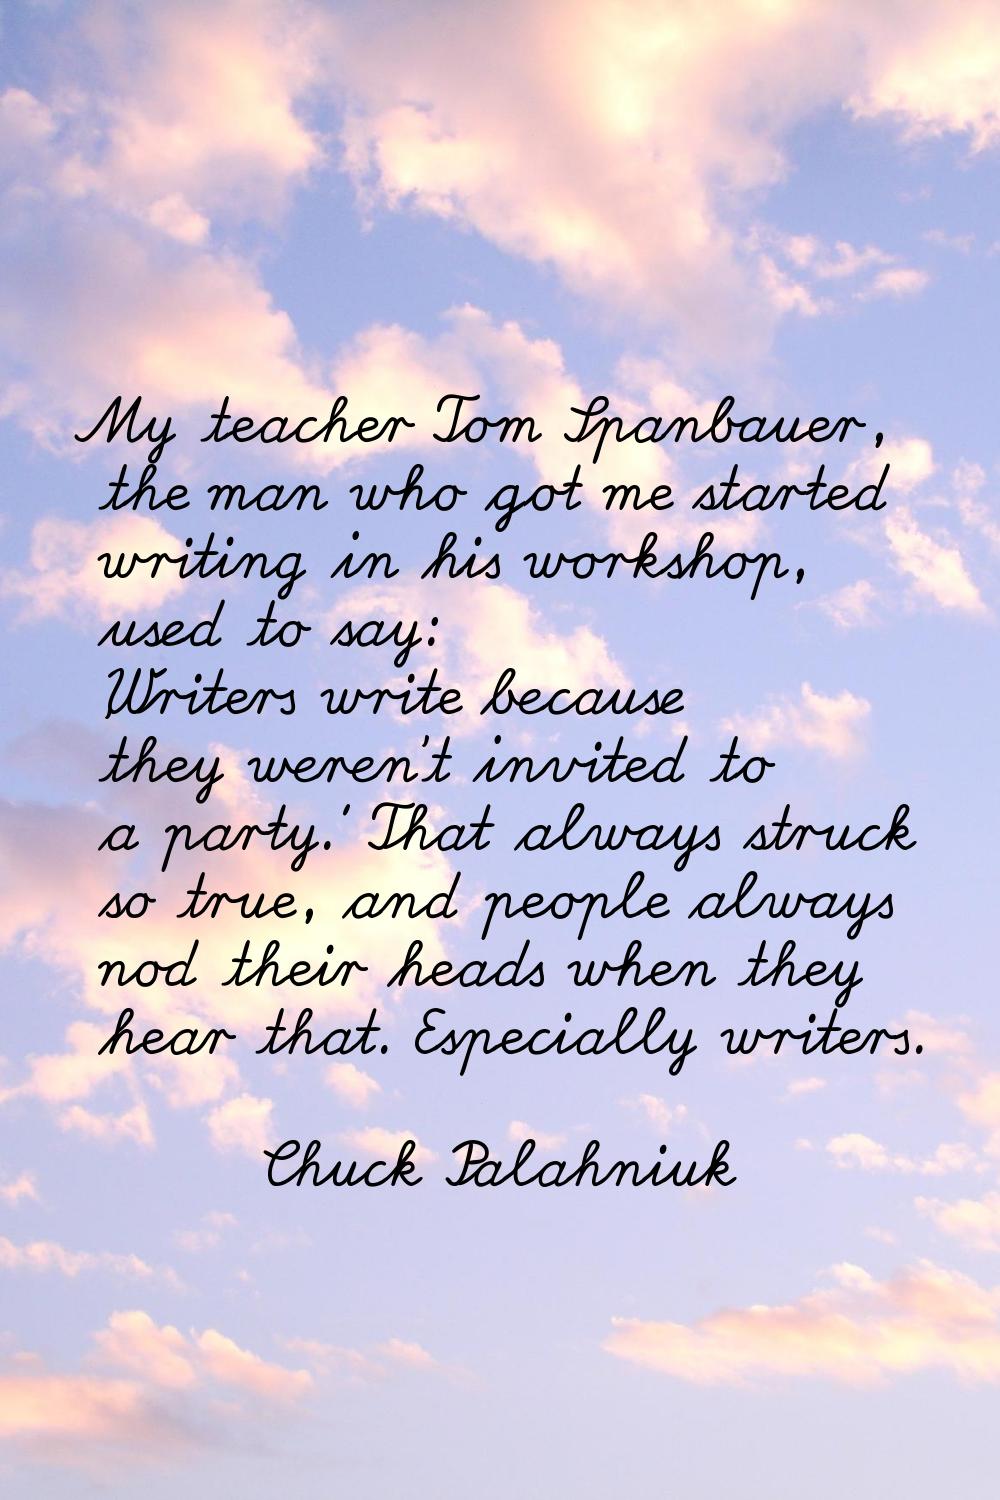 My teacher Tom Spanbauer, the man who got me started writing in his workshop, used to say: 'Writers